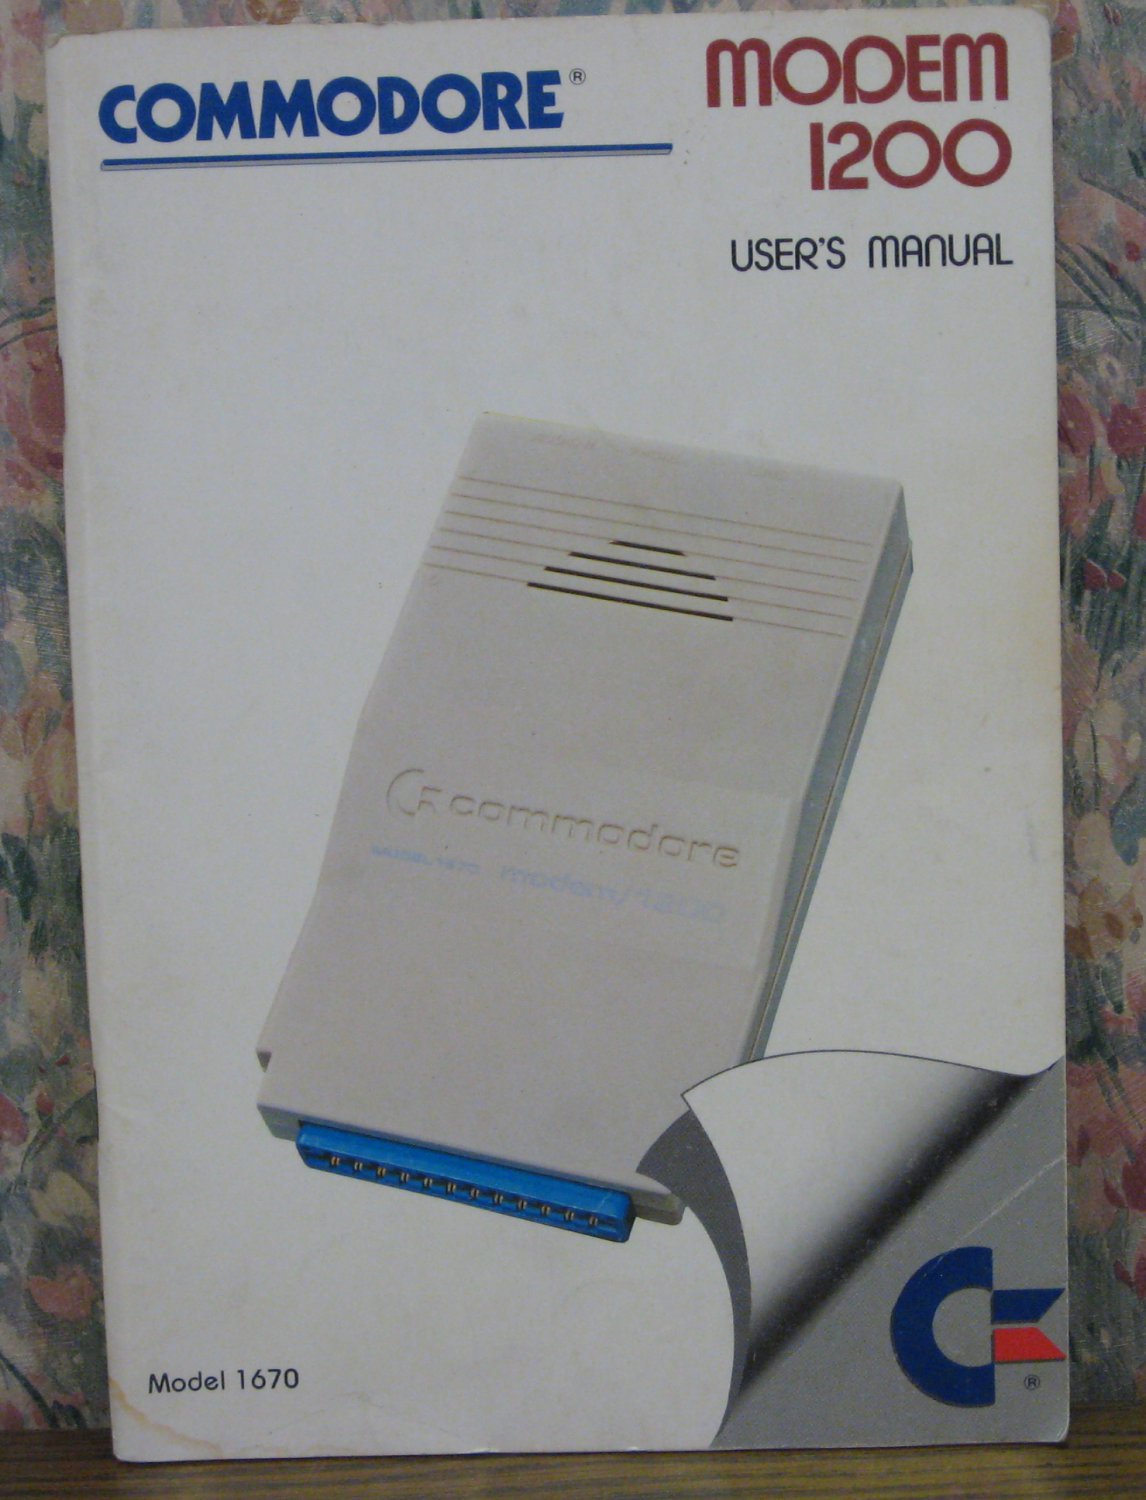 Computer Book - Commodore 1670 Modem 1200 User's Manual - 1987 Vintage